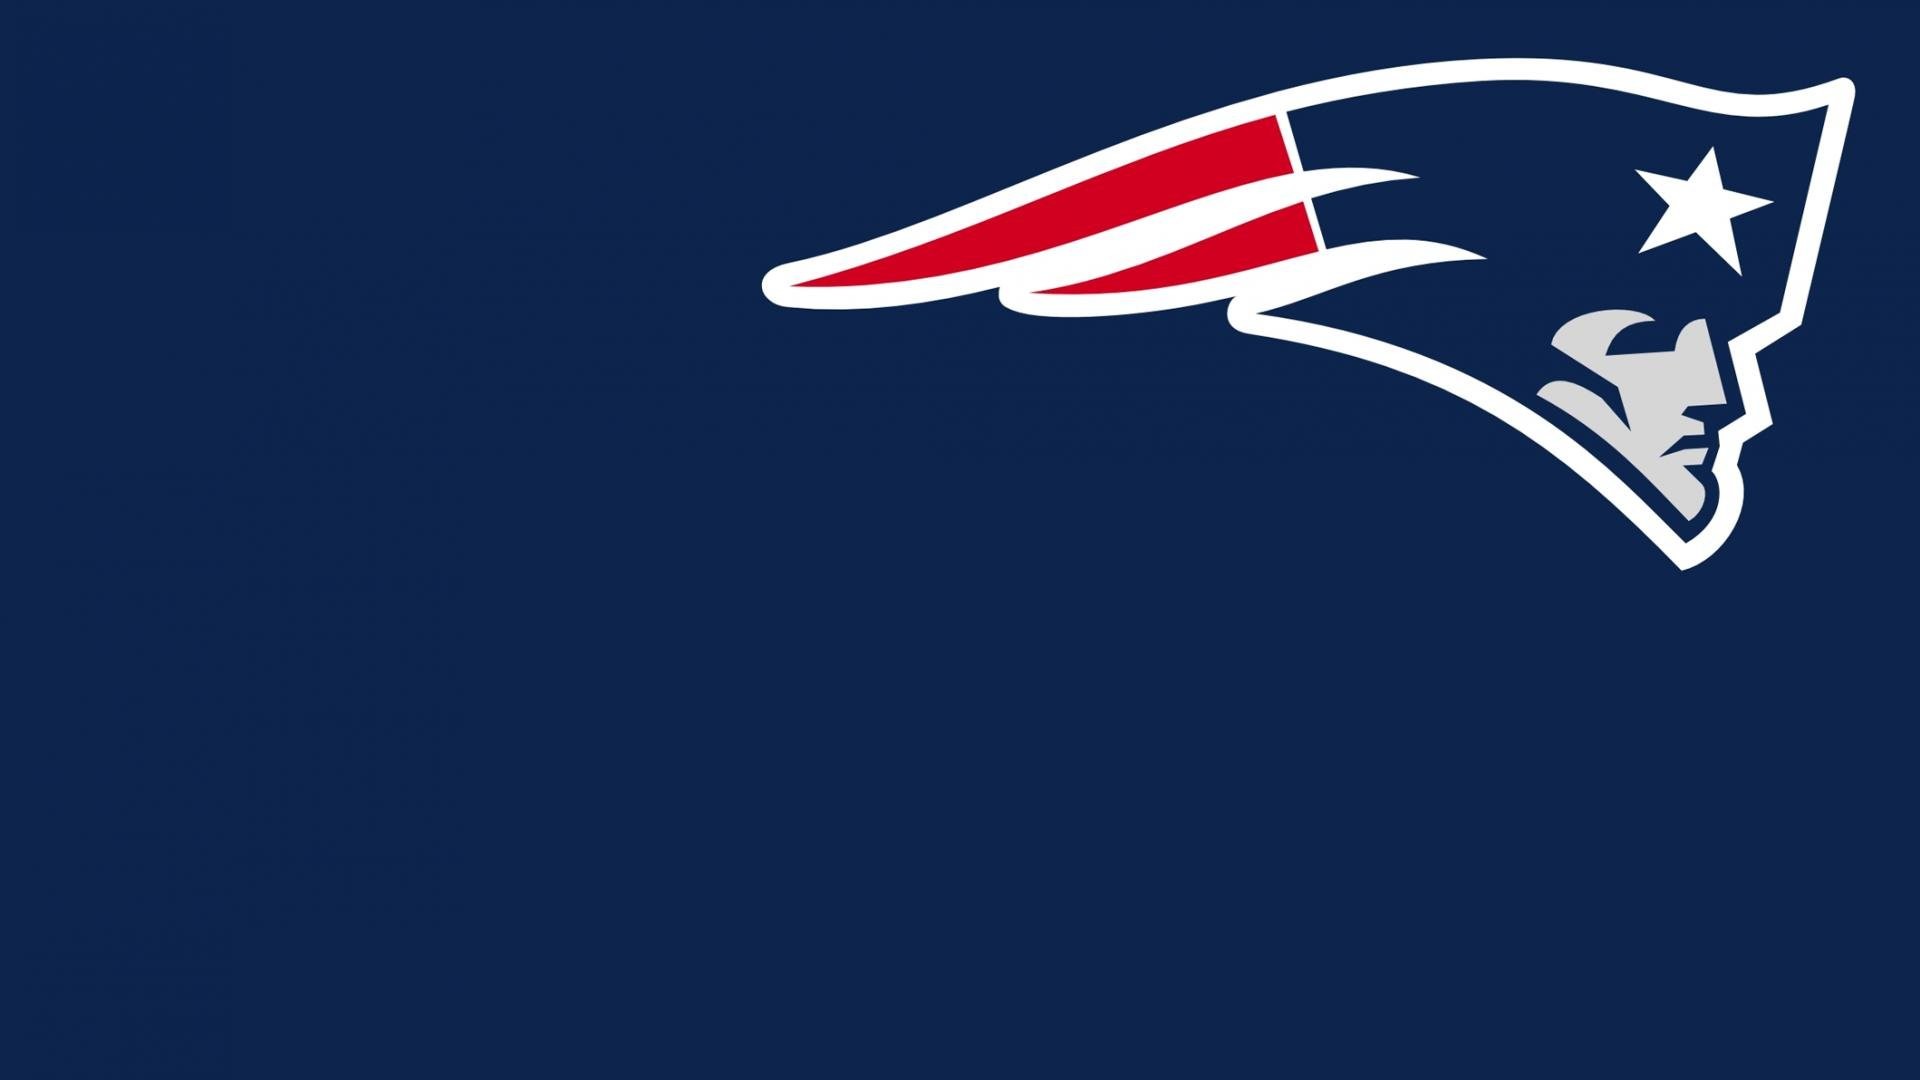 Patriots Wallpaper and HD Background free download on PicGaGa